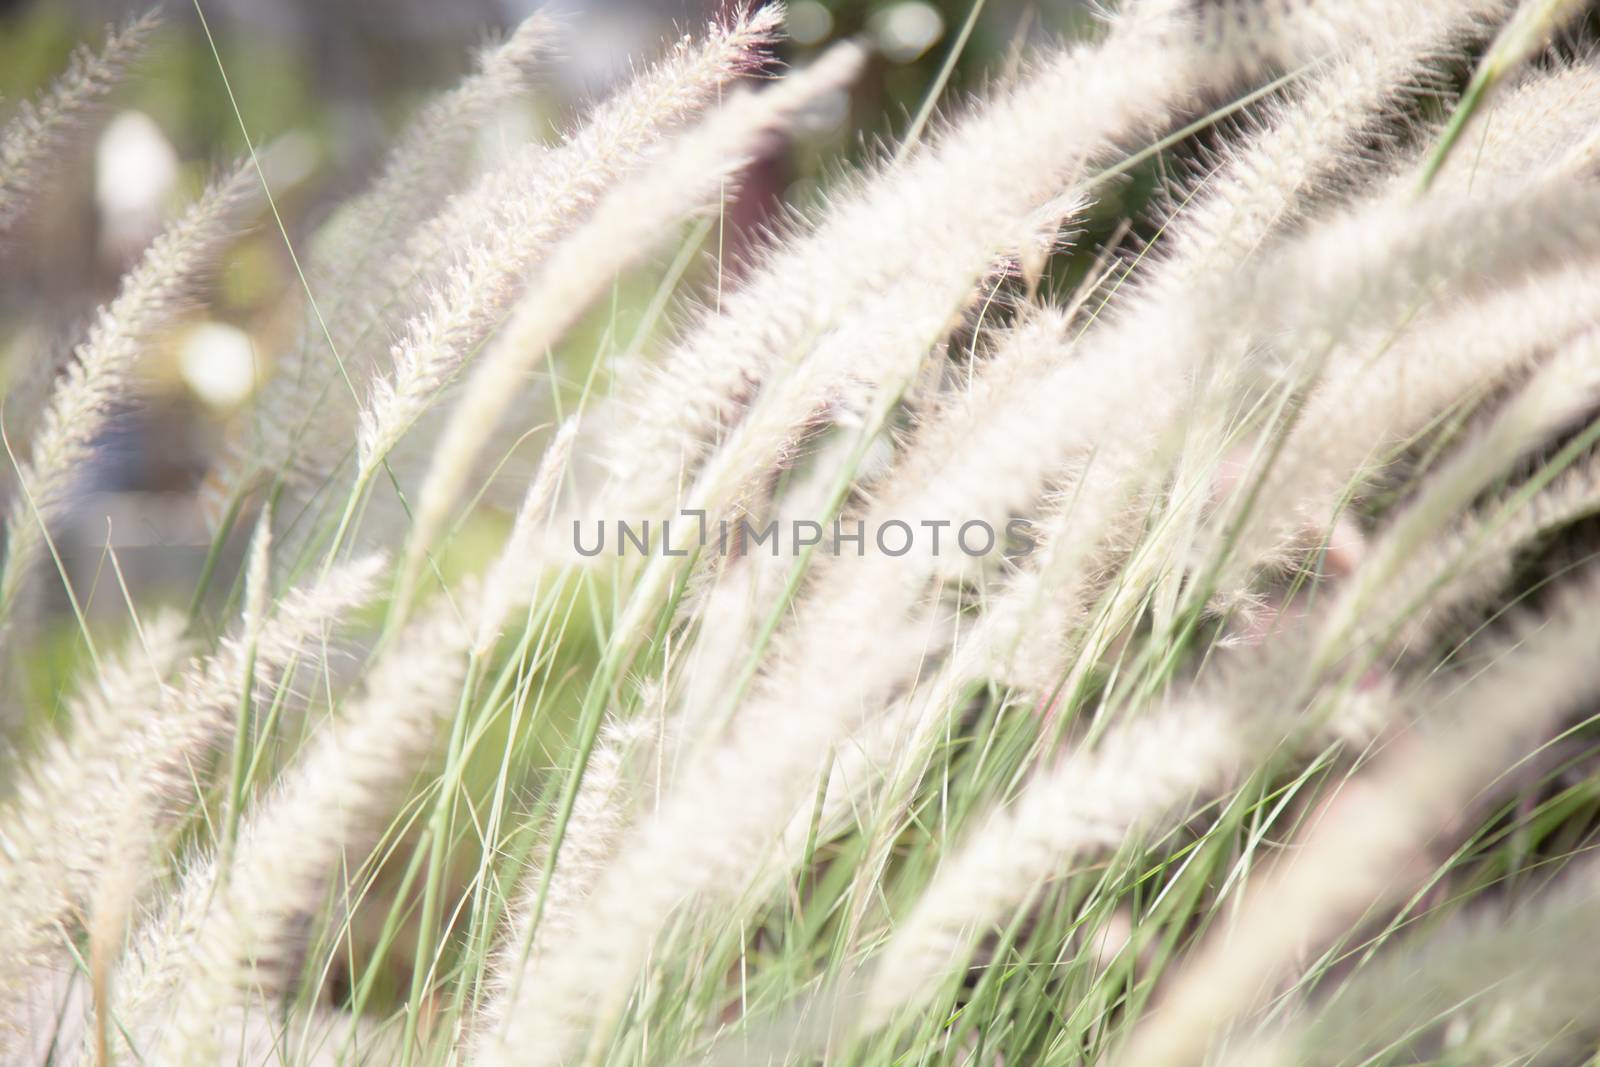 Flower of grass Rail slender grass and flowers can be blown in the wind.